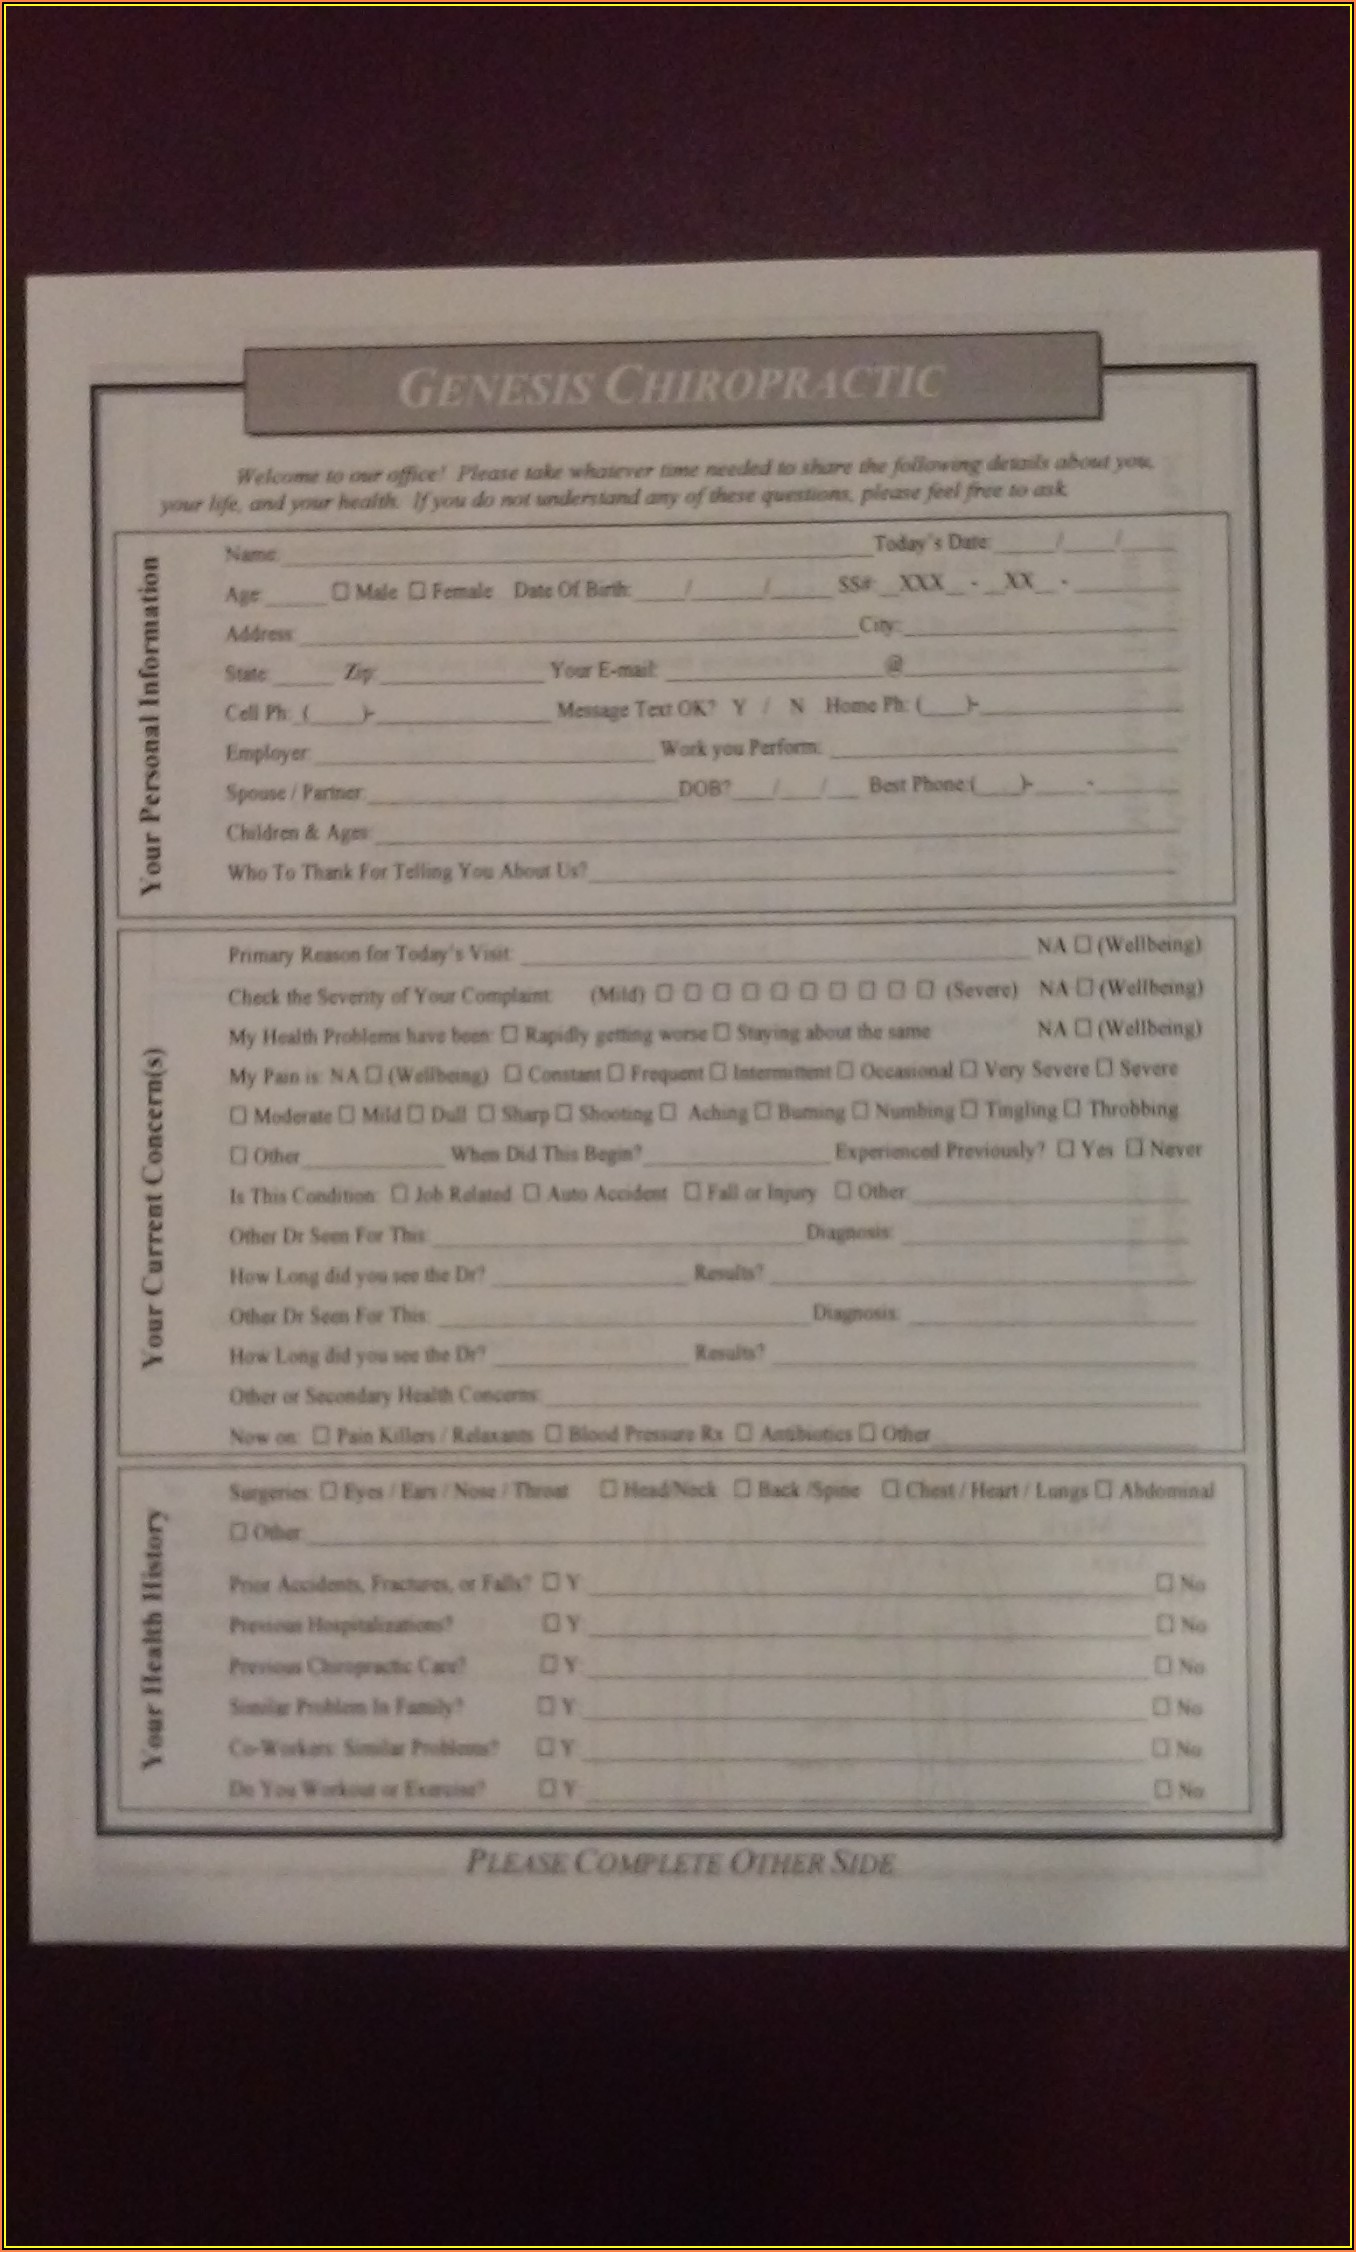 The Joint Chiropractic New Patient Forms